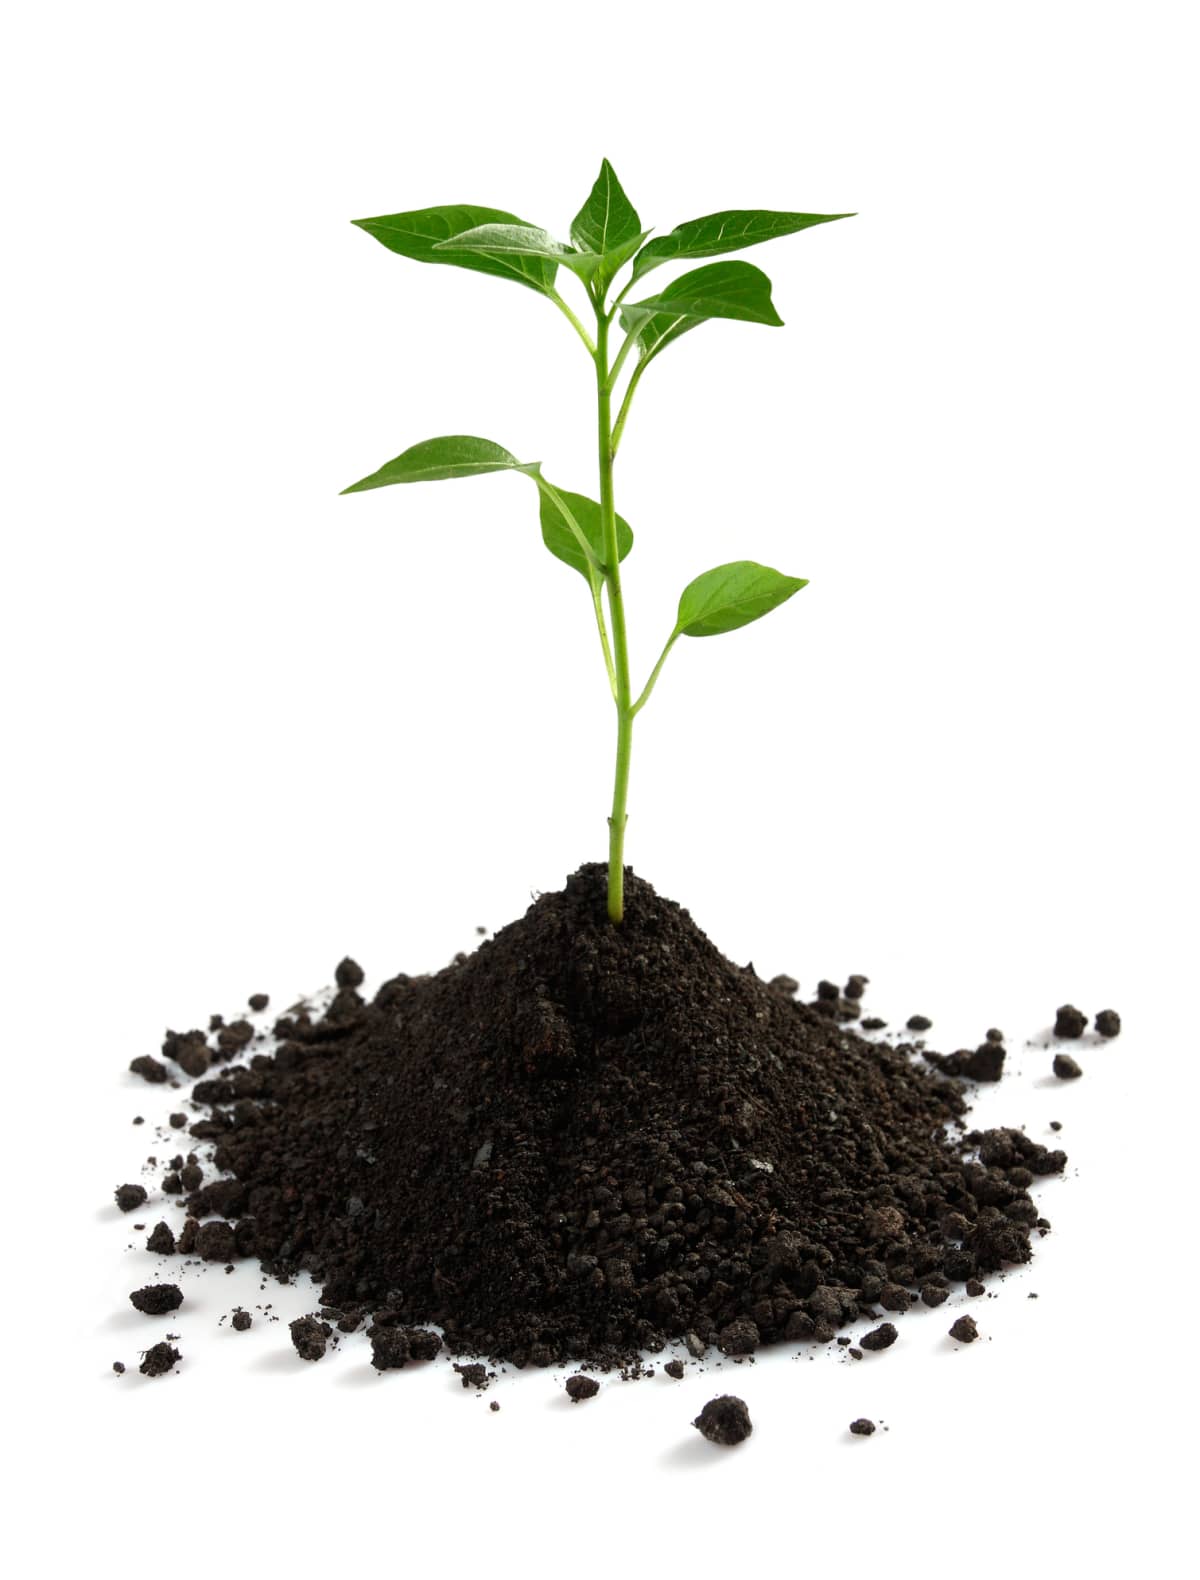 A plant growing out of a clump of soil against a white background